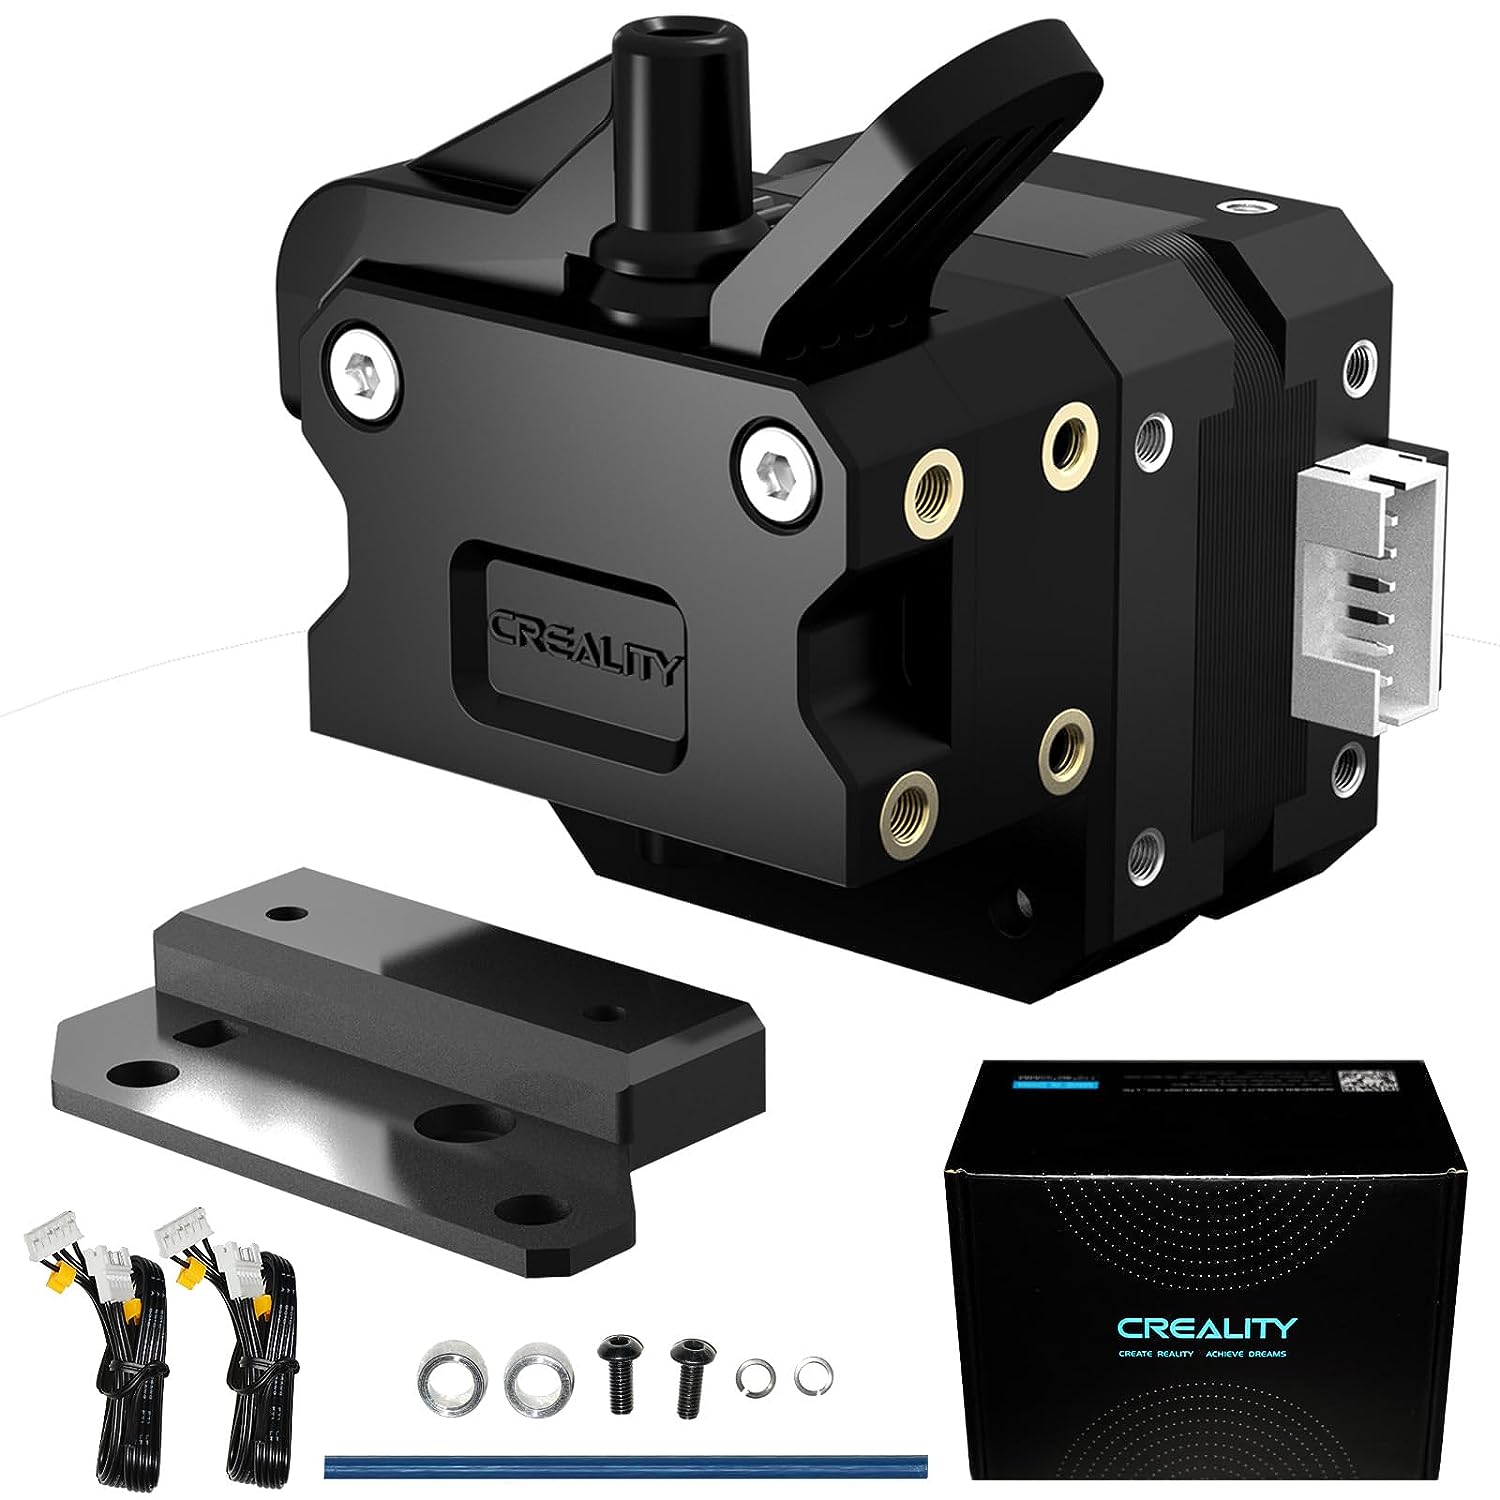 Creality Sprite Extruder Upgrade Kit for Ender 3 Neo Series or Ender 3/5 Series